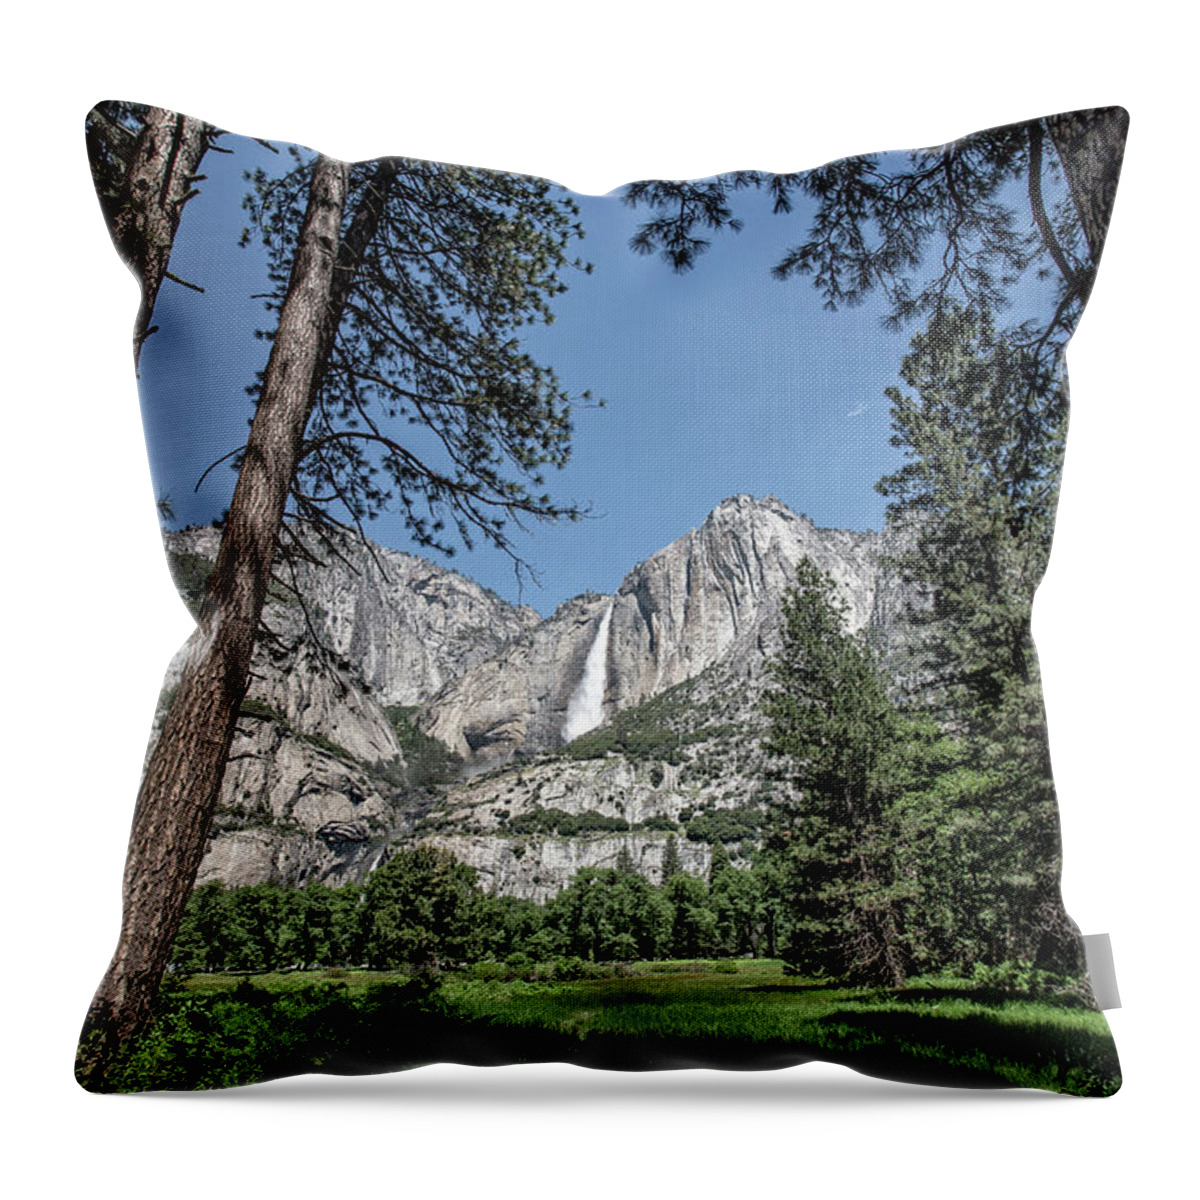 Yosemite Throw Pillow featuring the photograph Yosemite View 13 by Ryan Weddle